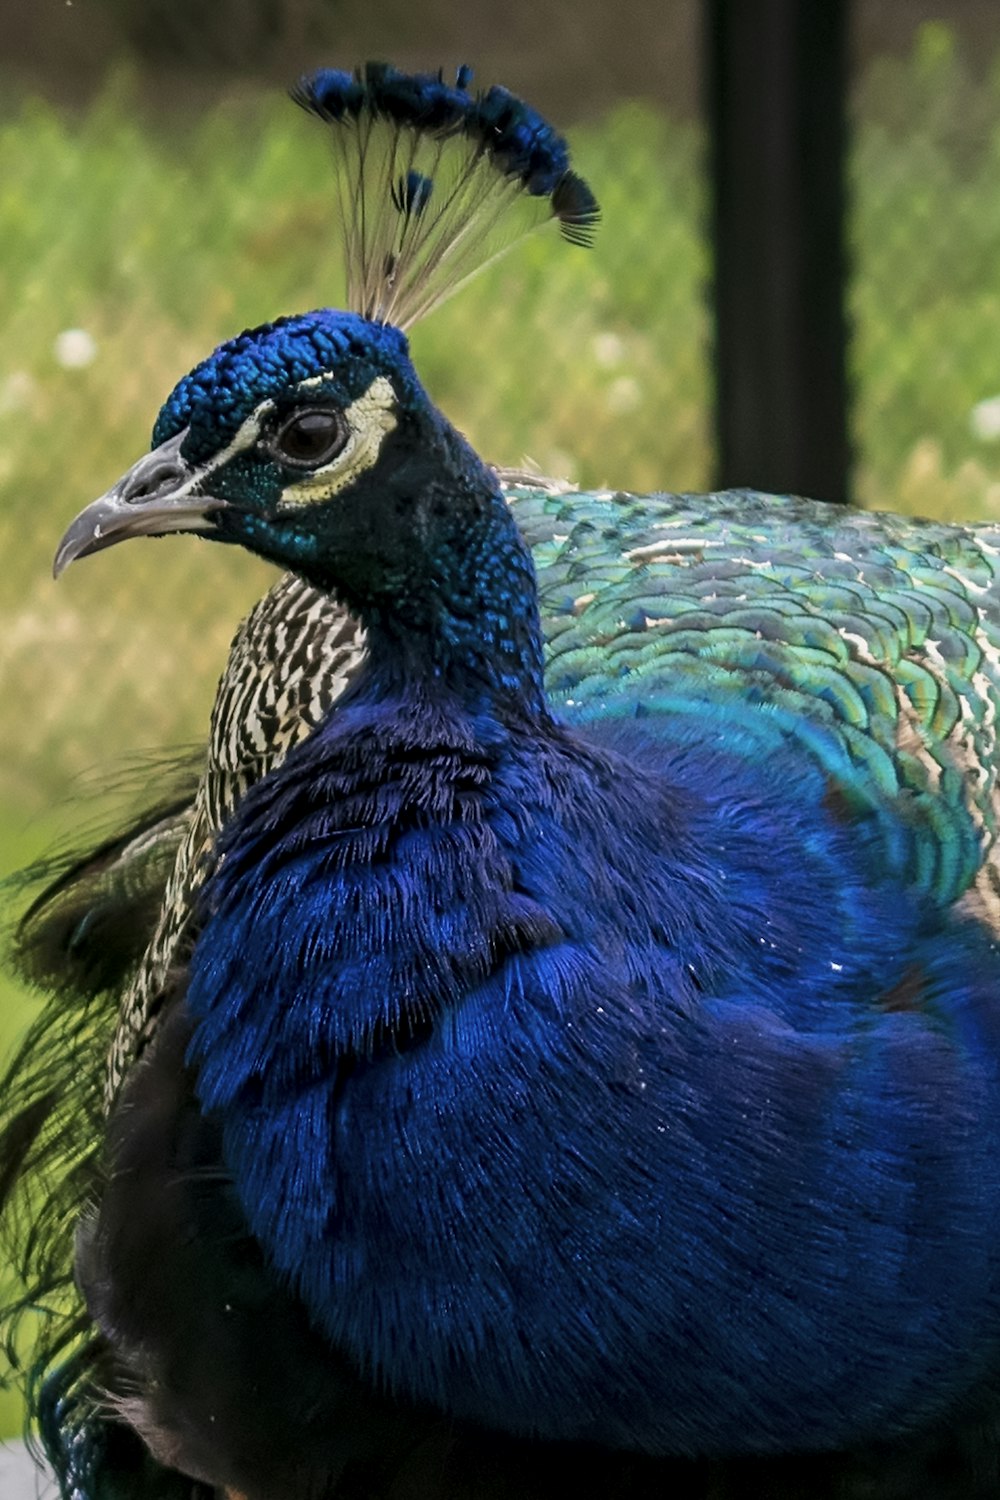 a close up of a peacock near a fence